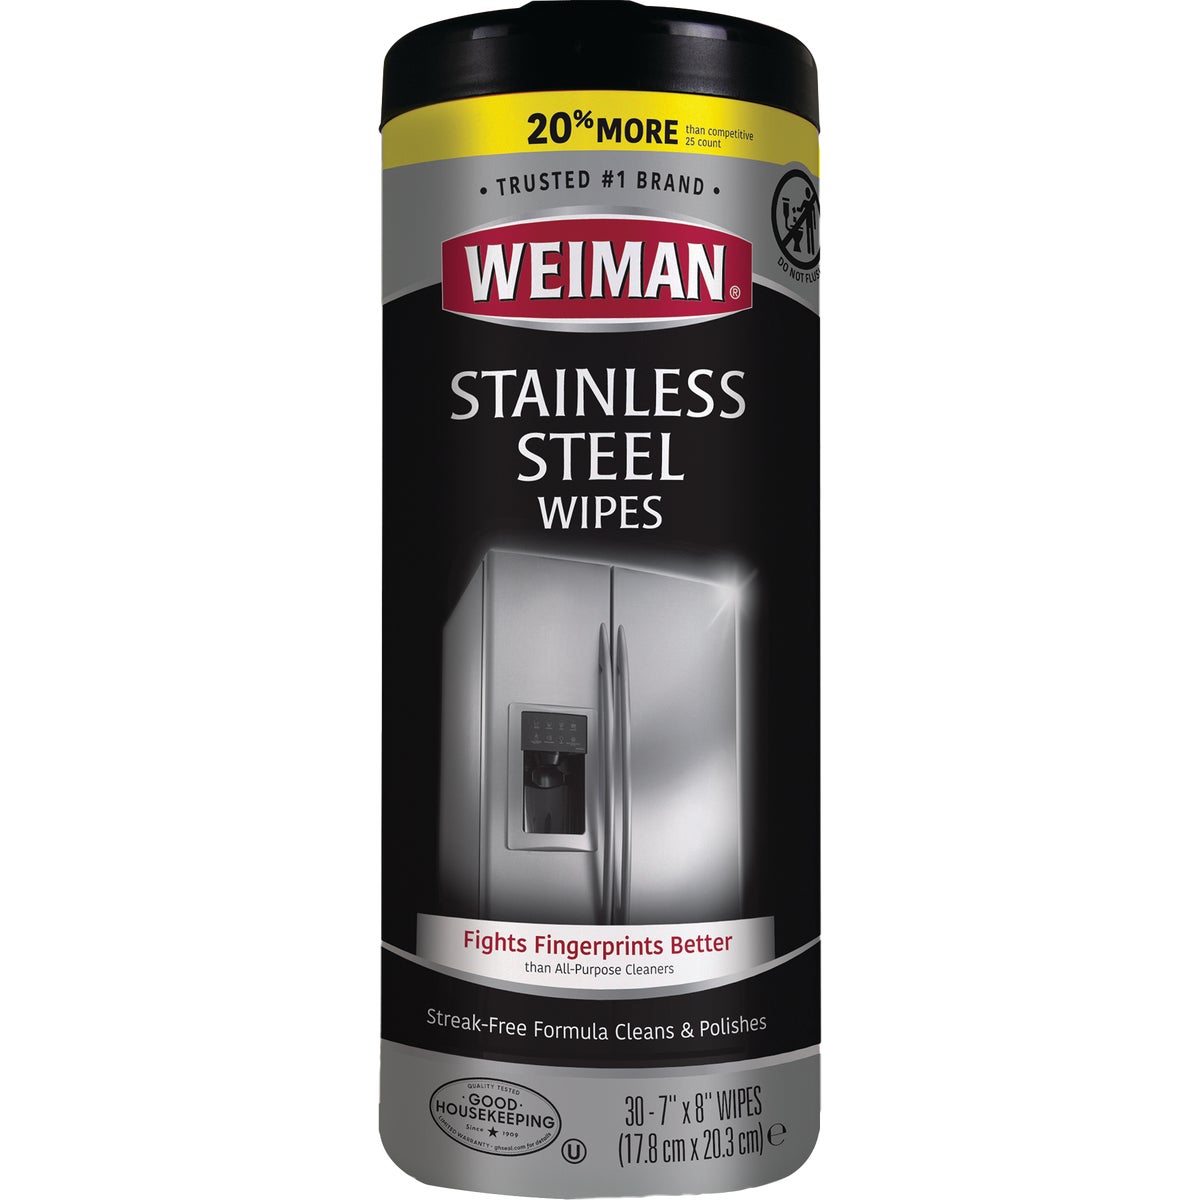 Weiman 3.25 In. x 8 In. Stainless Steel Wipes (30-Count)